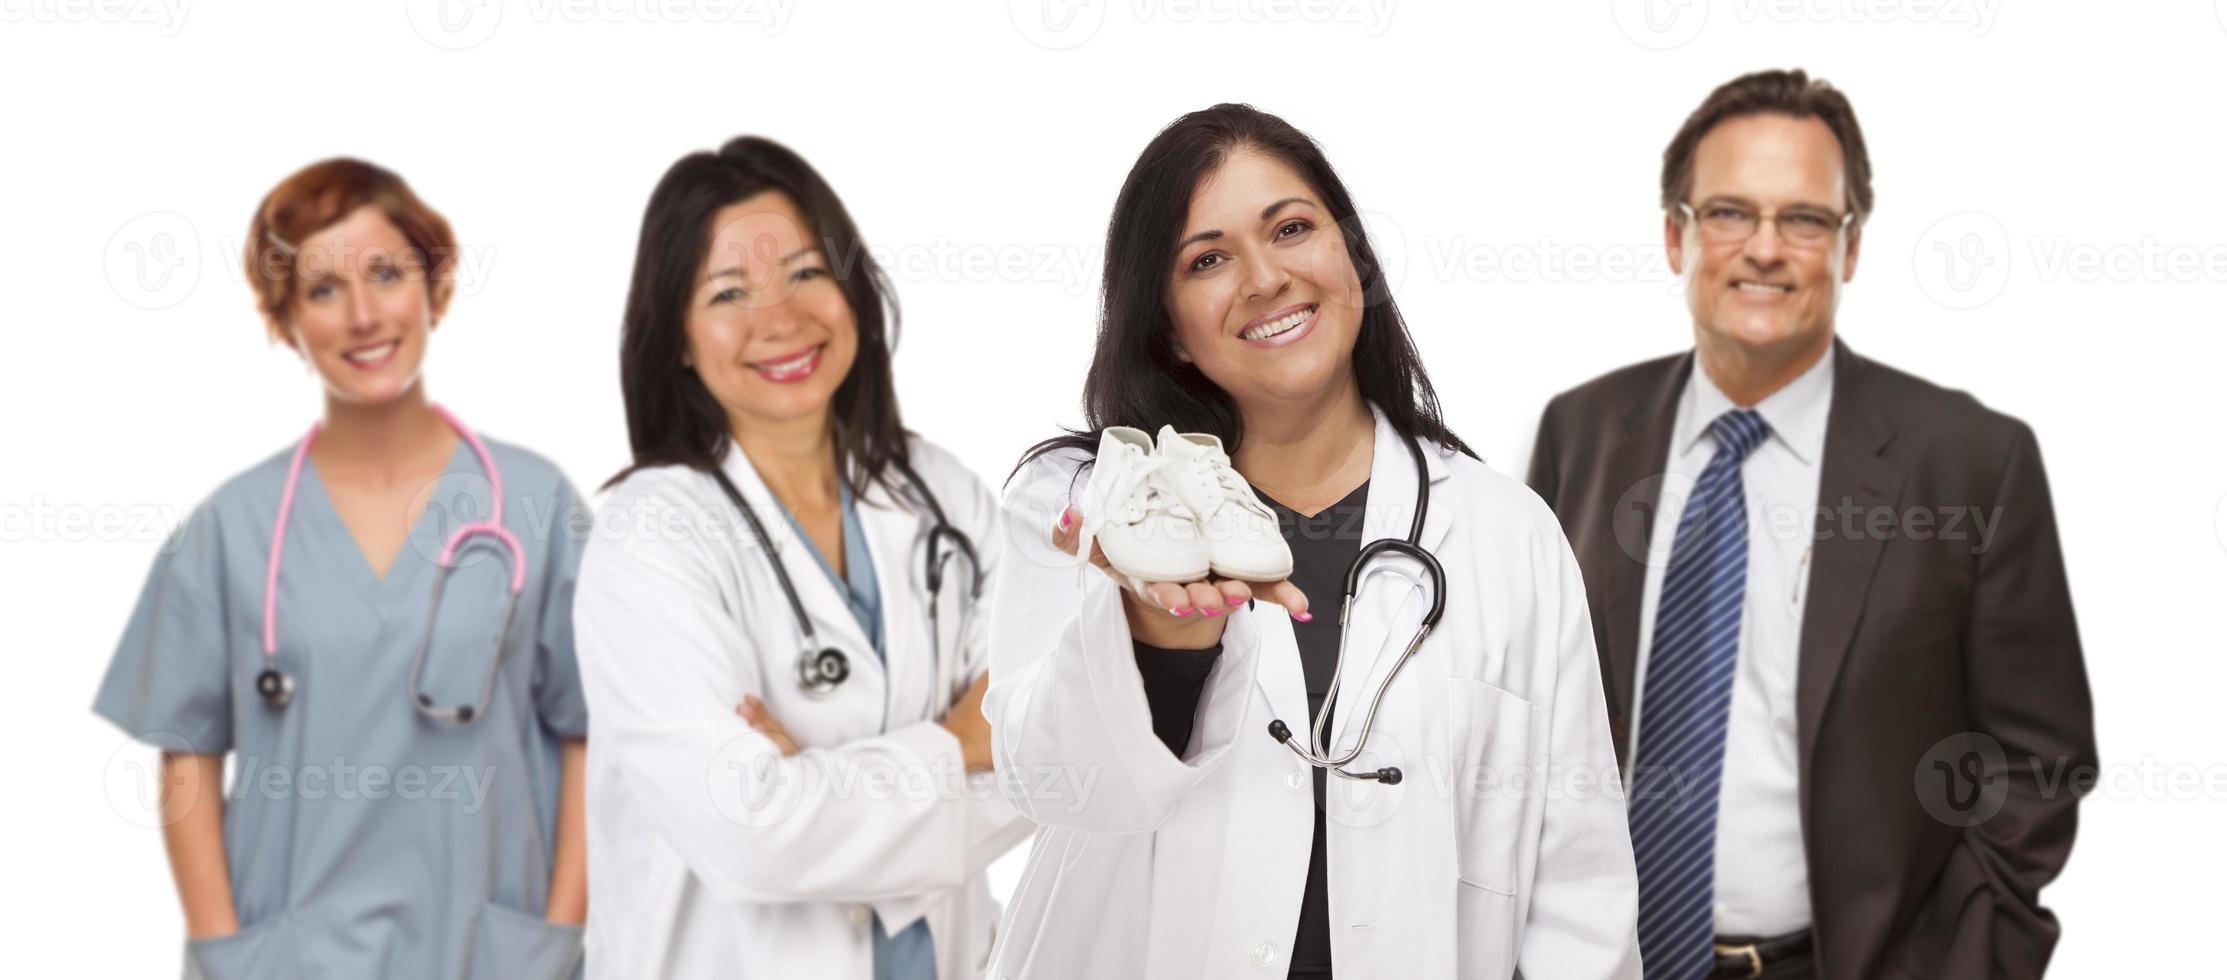 Hispanic Female Doctor or Nurse with Baby Shoes and Support Staff Behind photo